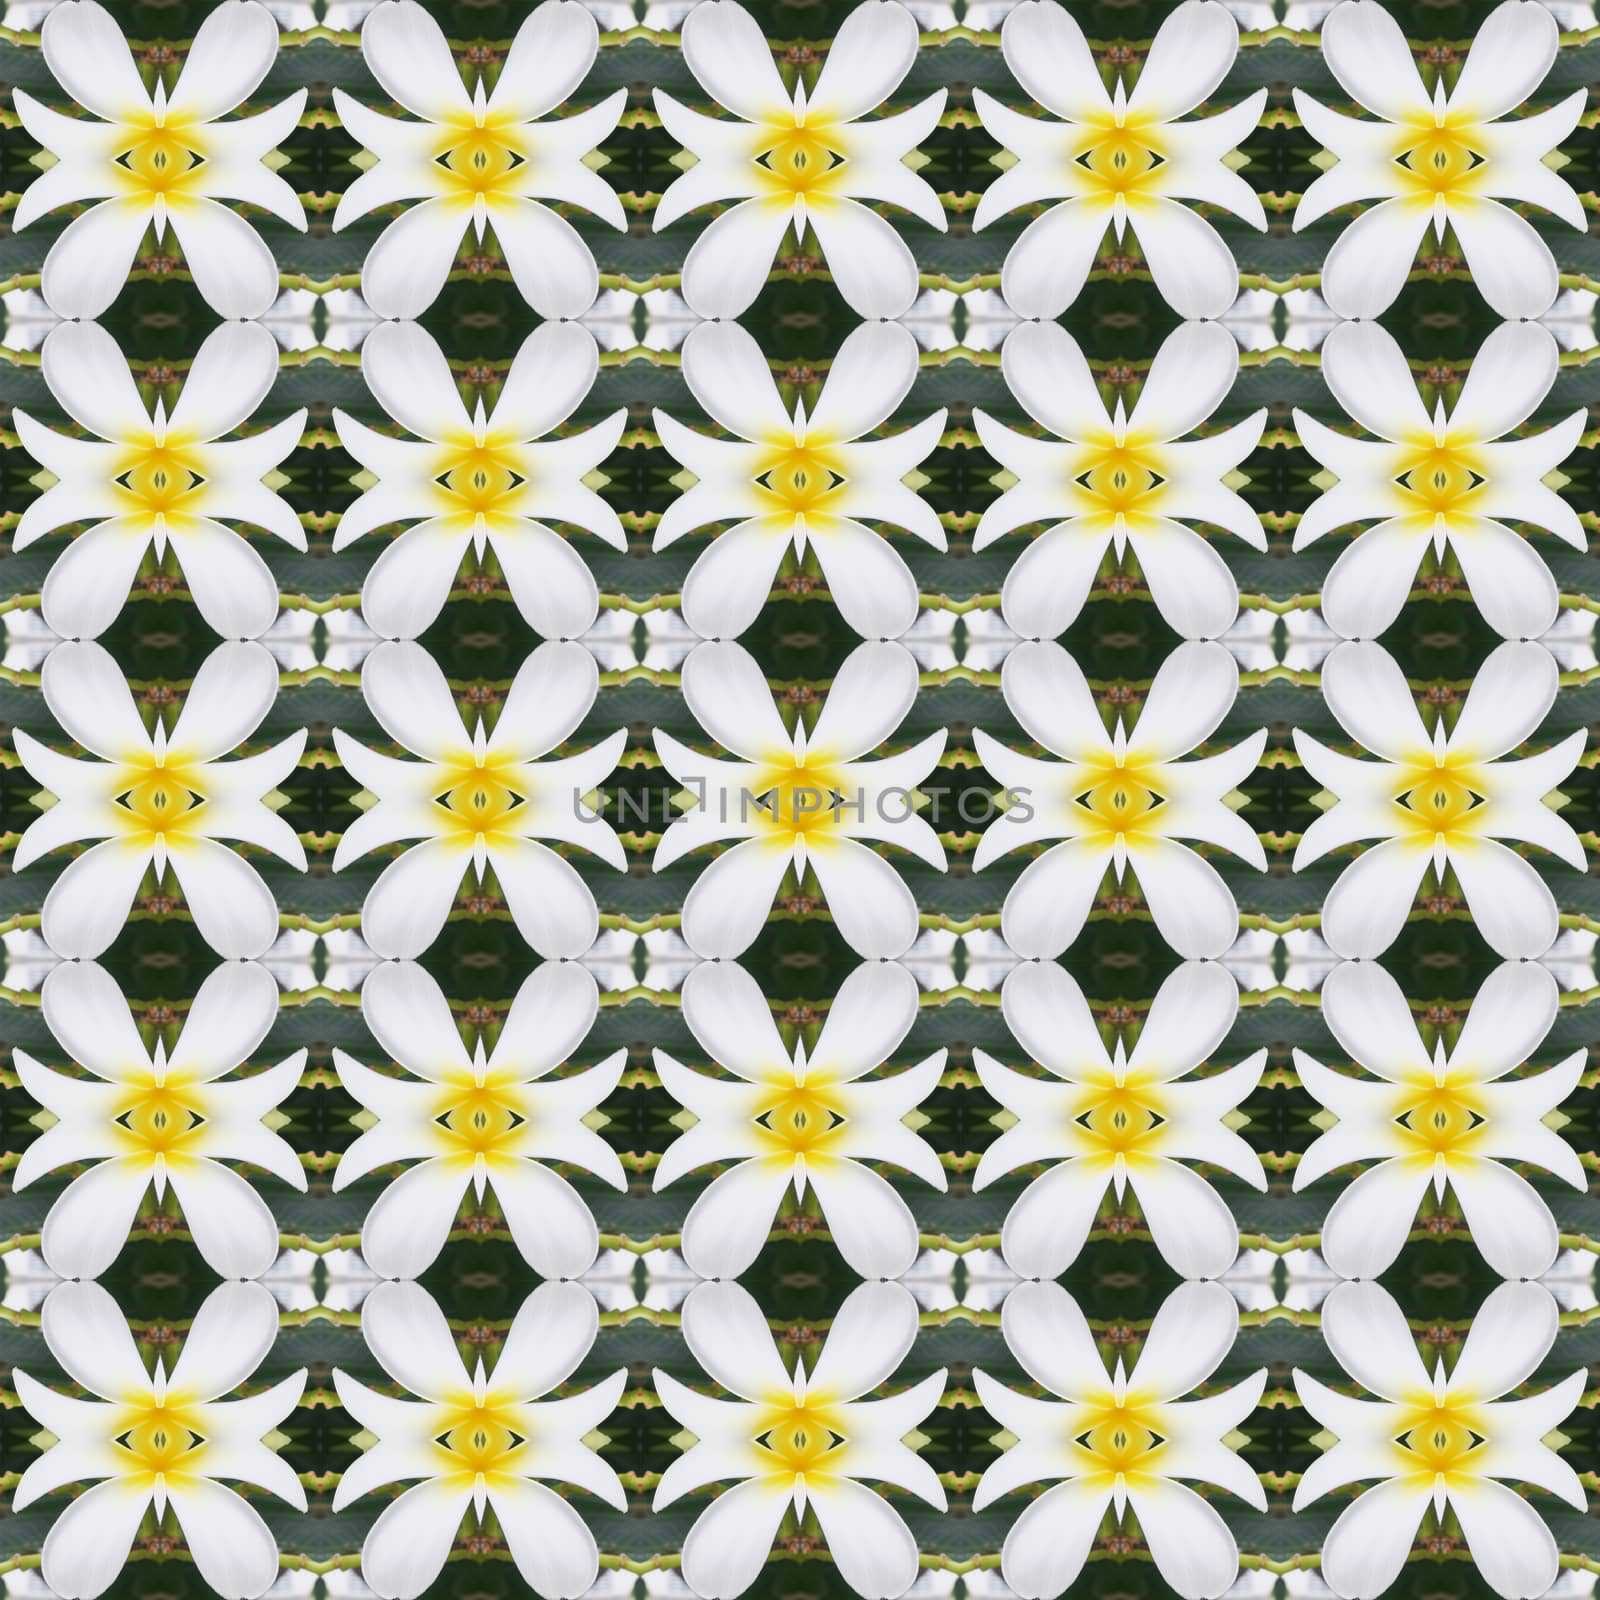 White Frangipani flowers, a bouquet of flowers seamless use as pattern and wallpaper.